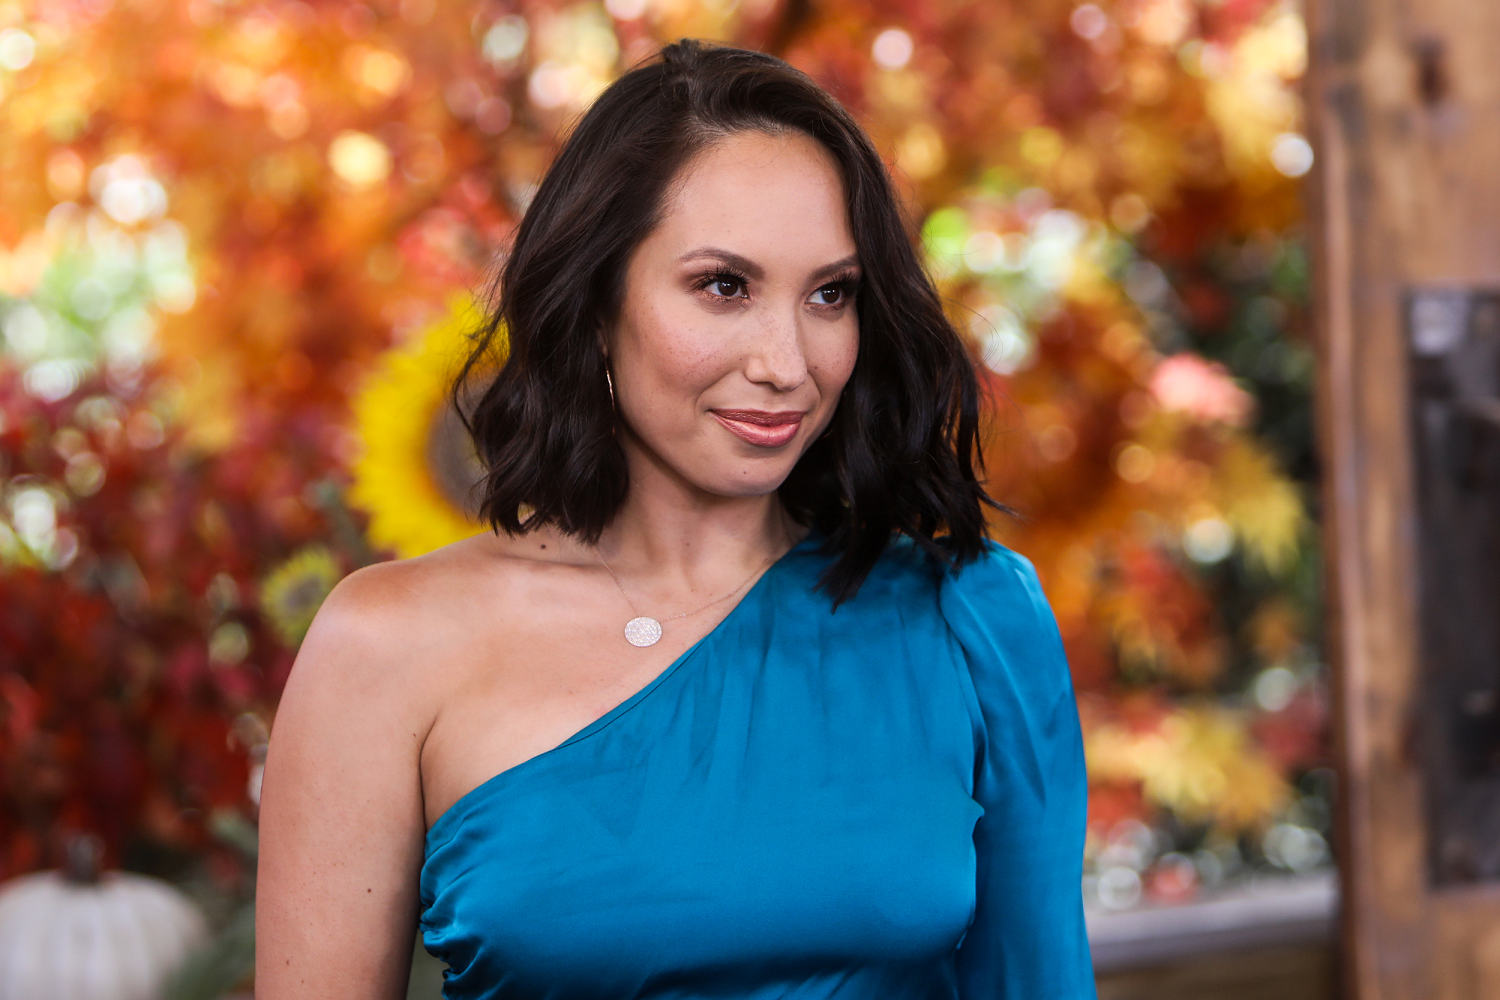 Cheryl Burke opens up on body dysmorphia, feeling 'too fat' to be on 'Dancing with the Stars'